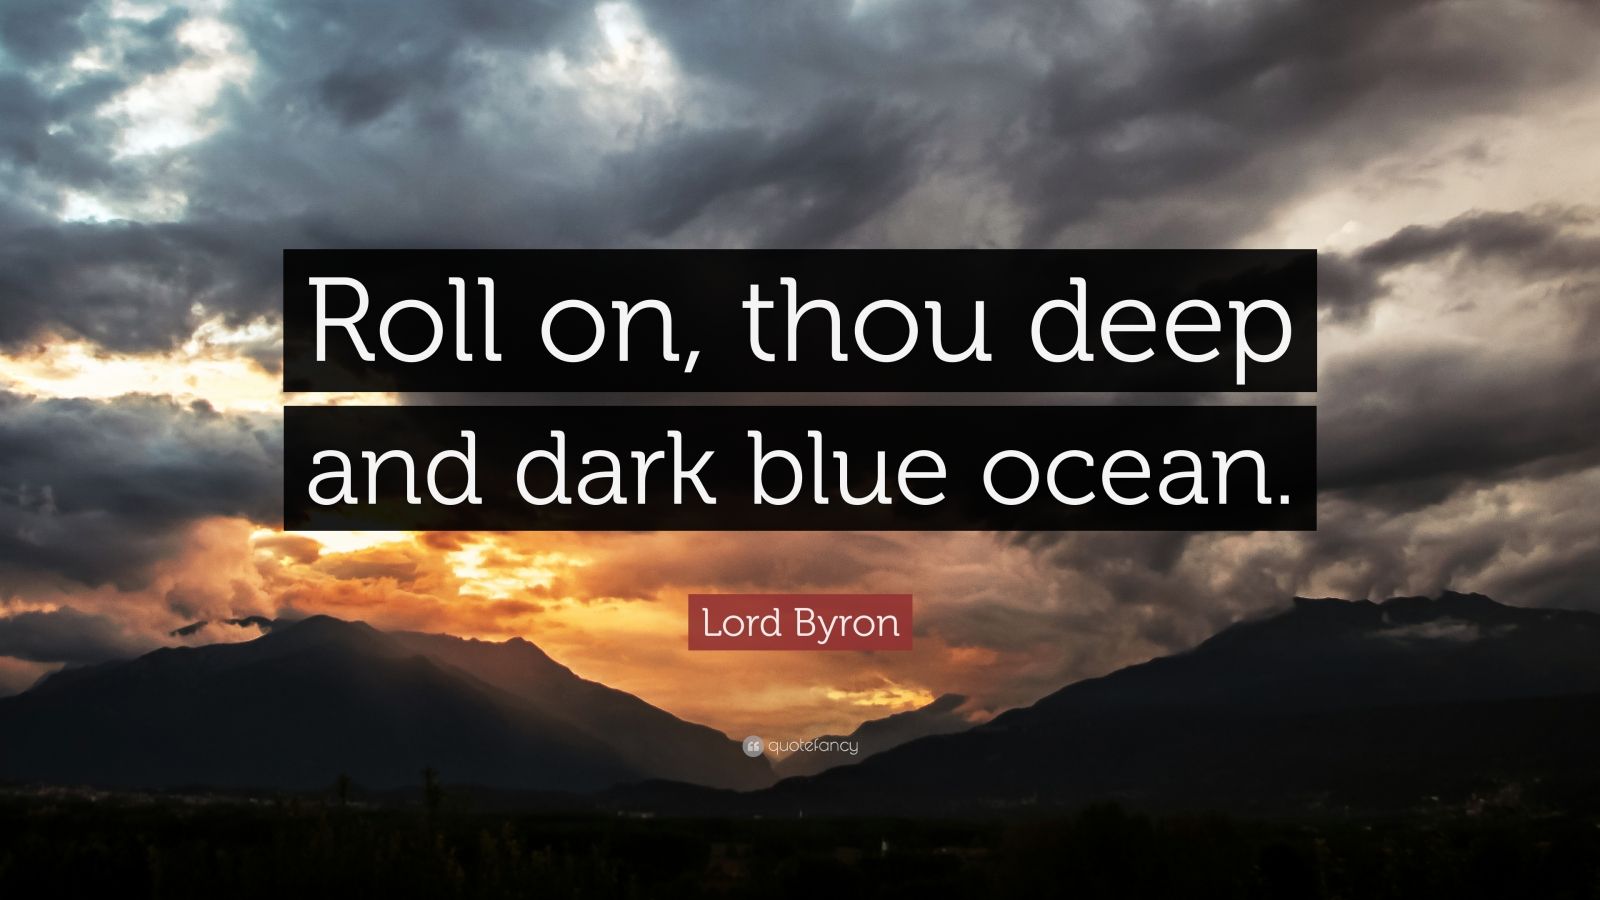 Lord Byron Quote: "Roll on, thou deep and dark blue ocean." (9 wallpapers) - Quotefancy